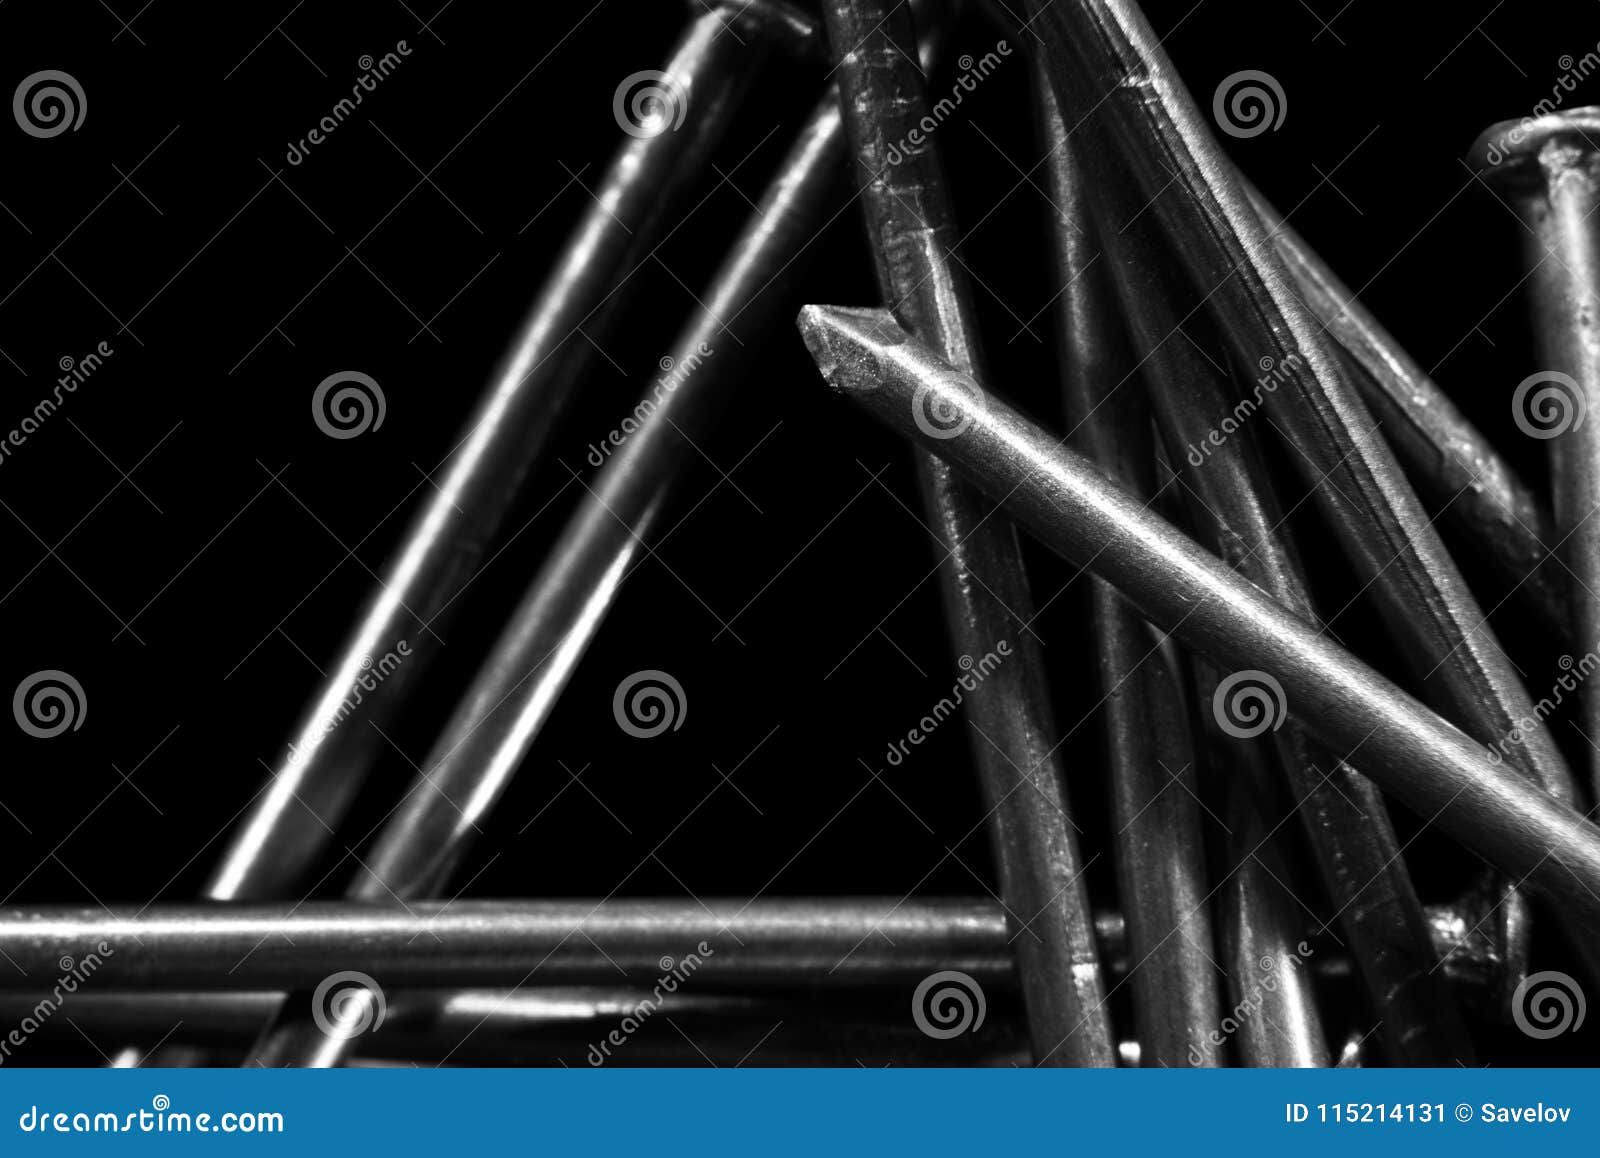 A Bunch of Nails on a Black Background is Macro, Soft Focus Stock Image ...